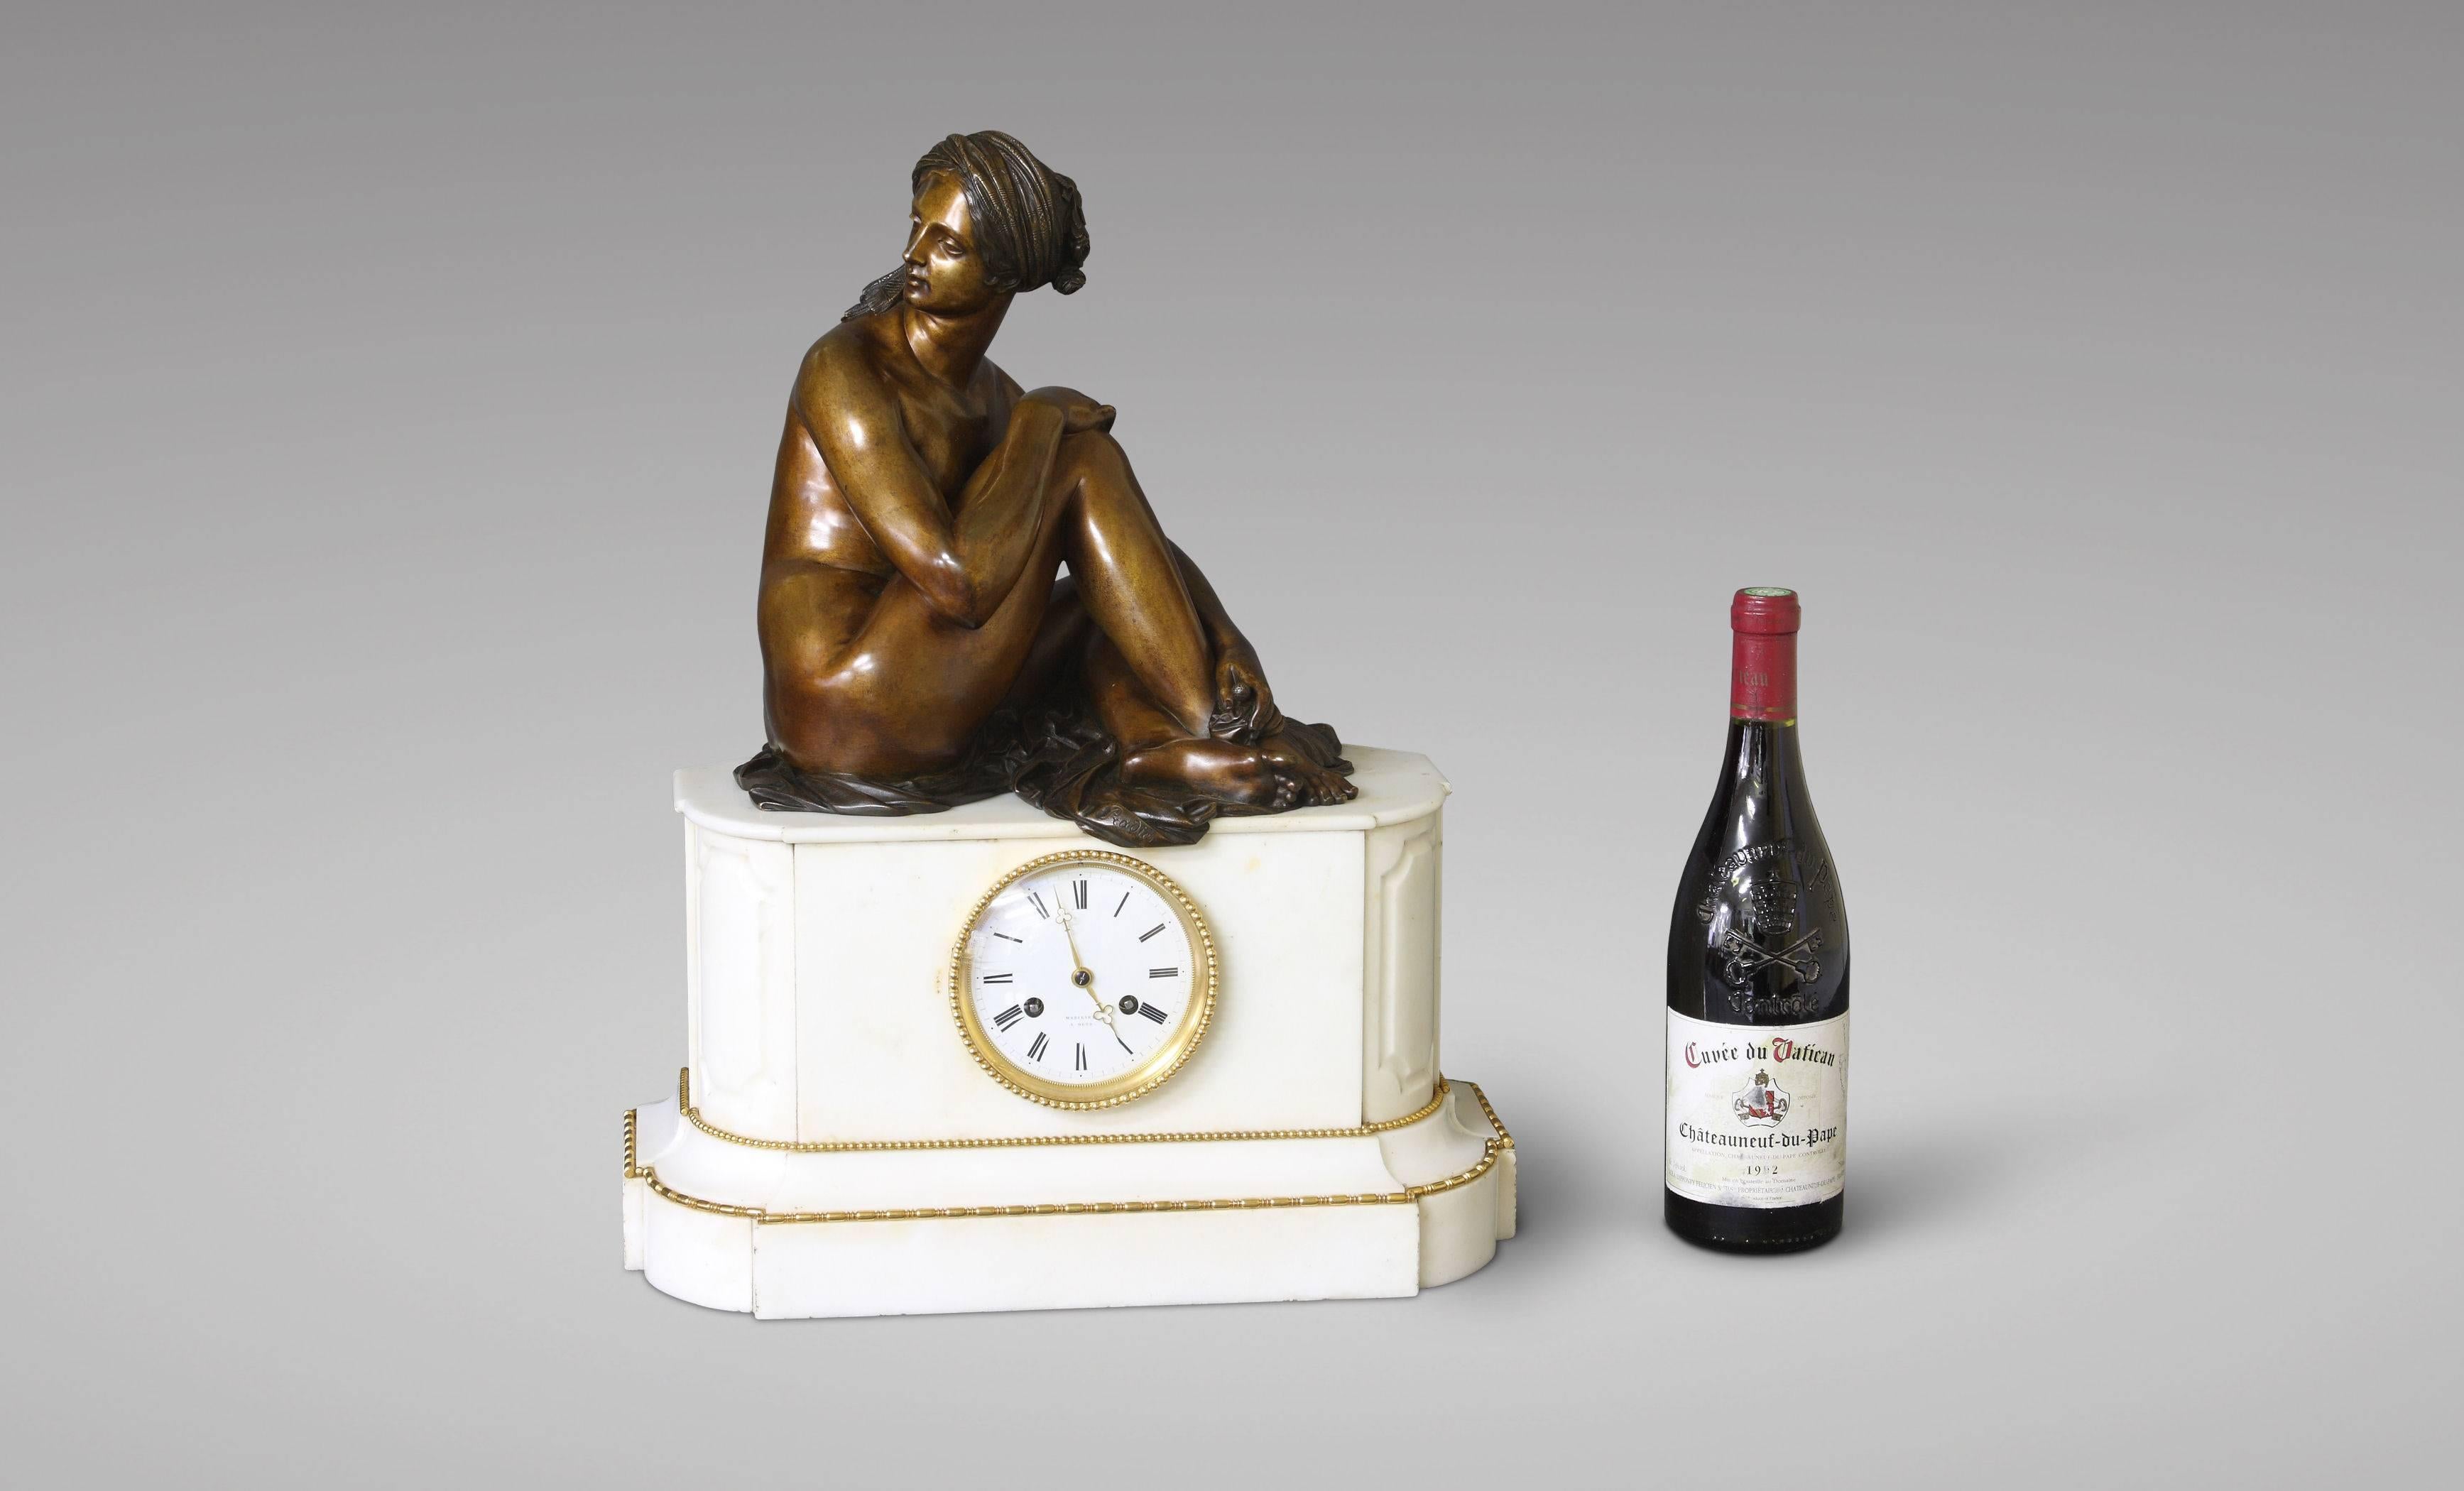 Mid-19th Century White Marble Clock with a Bronze Statue of an 